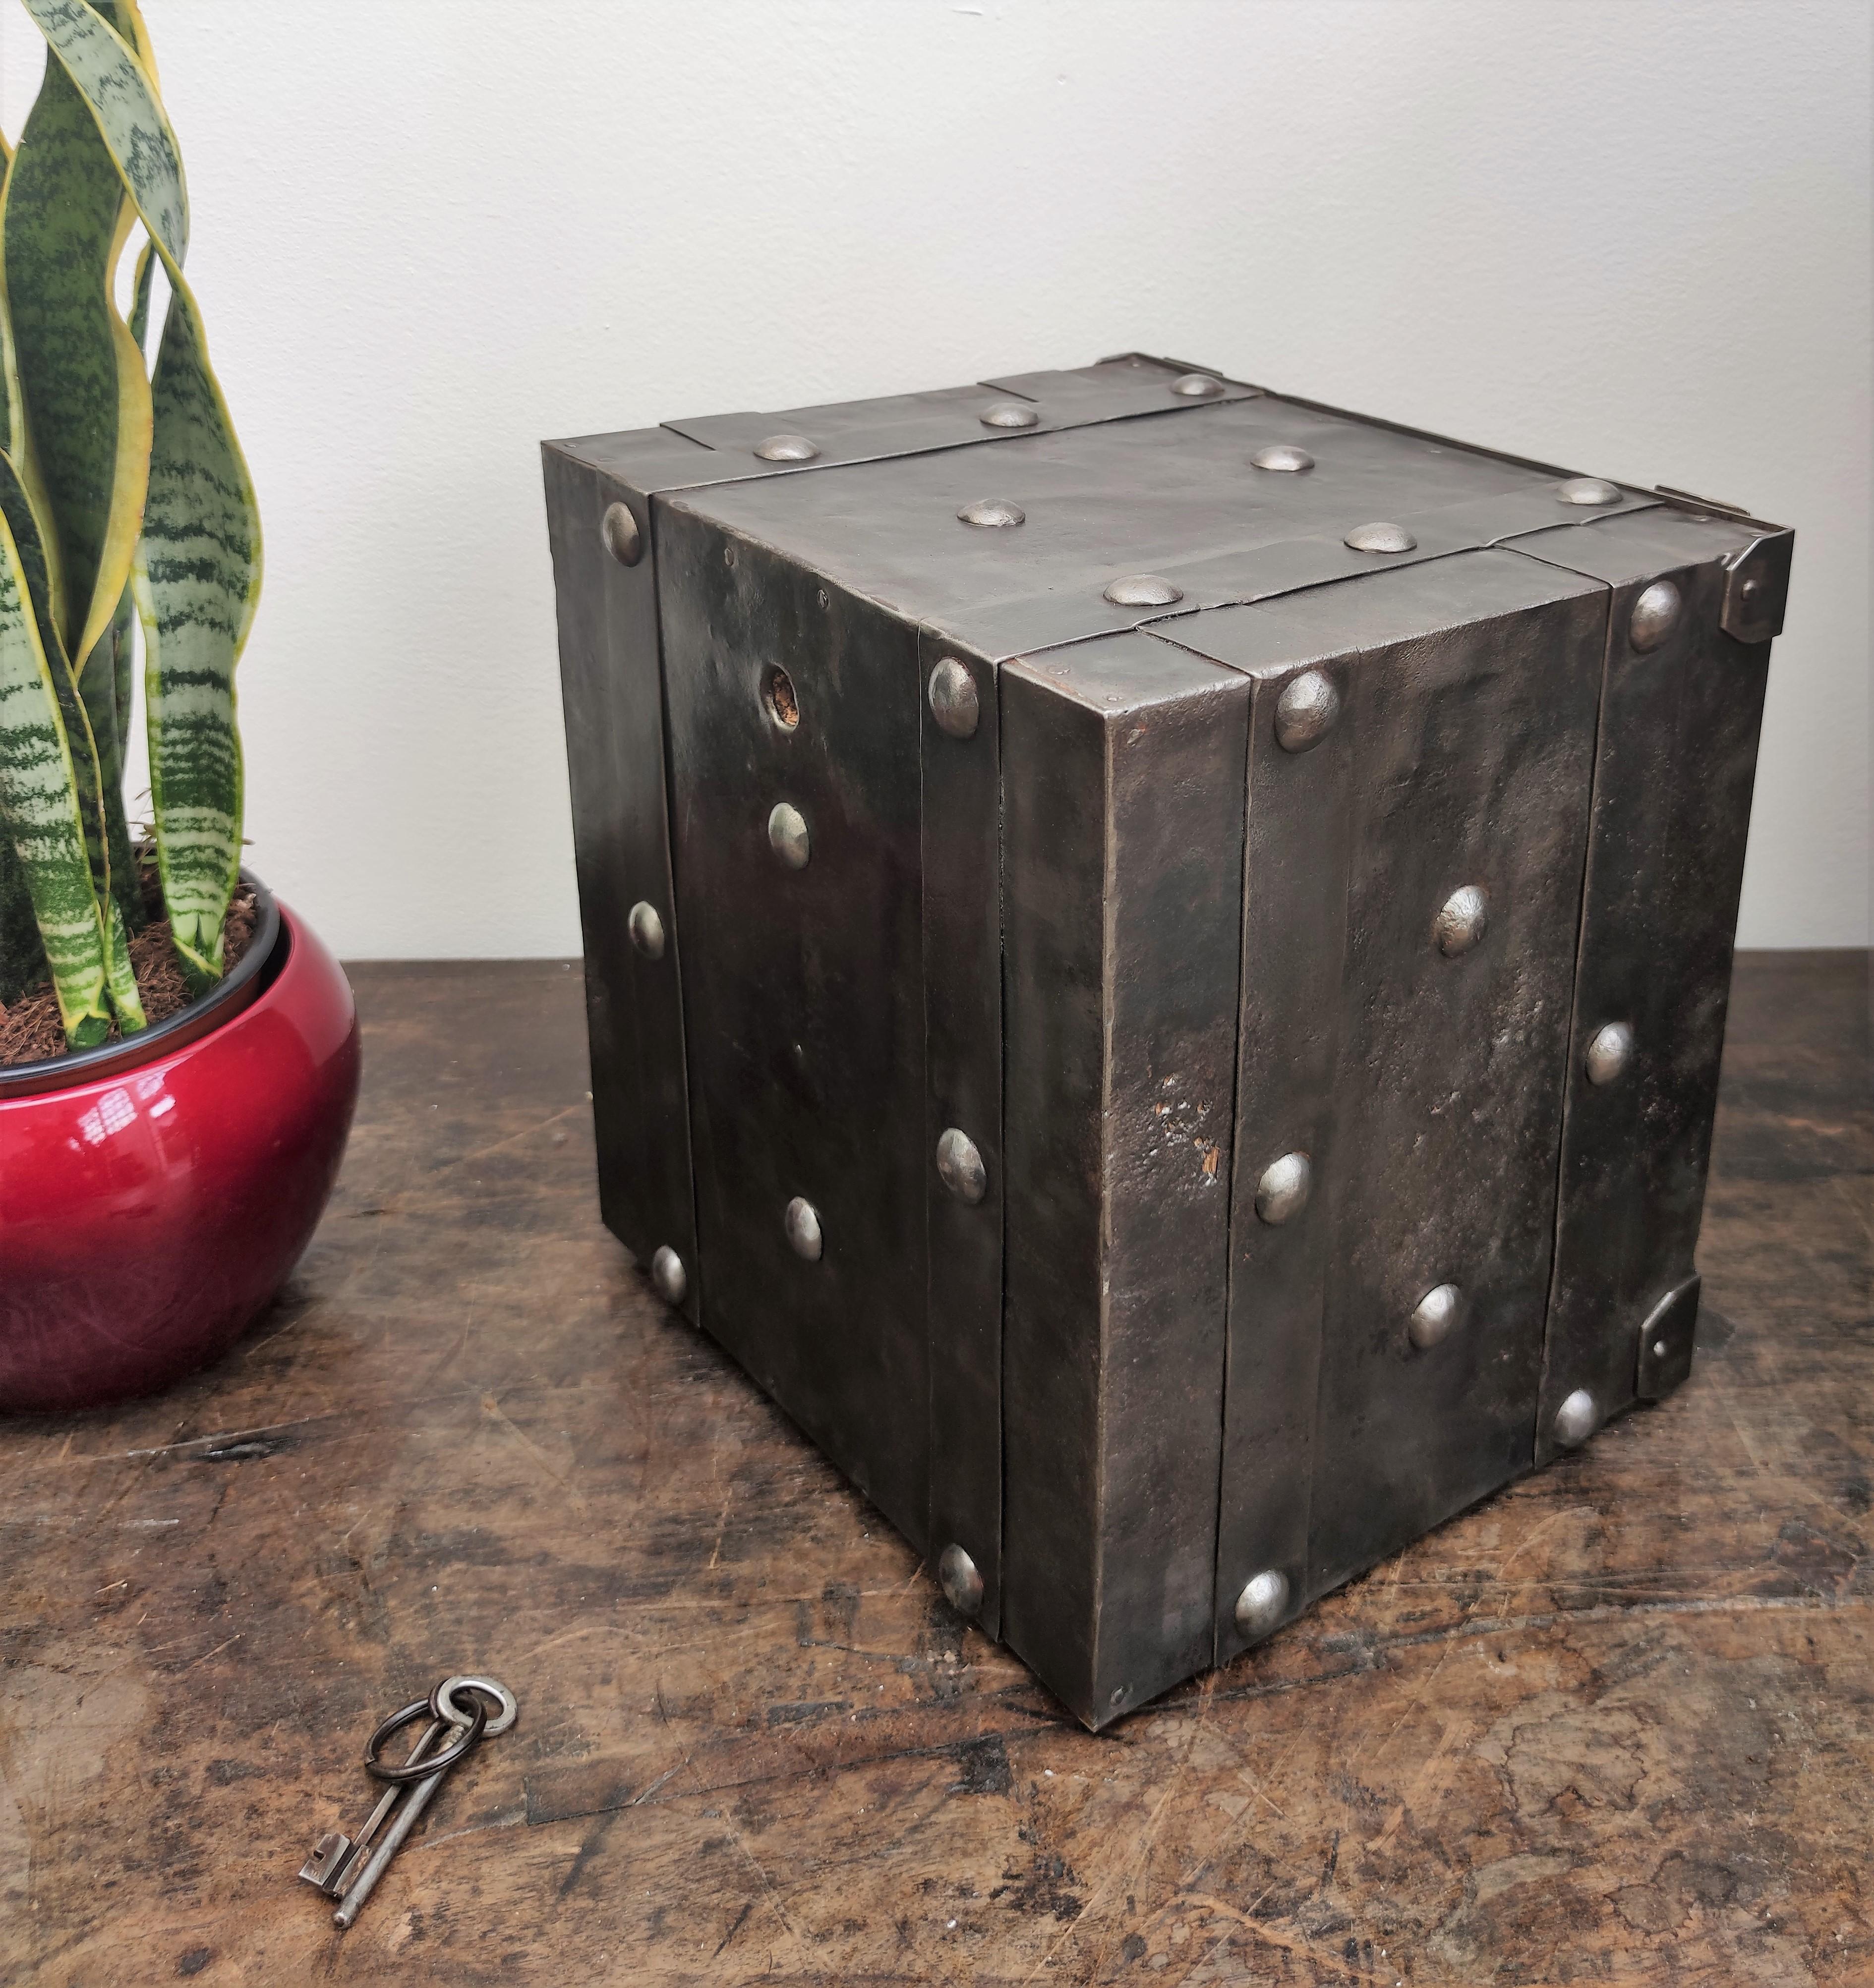 Italian 18th Century Wrought Iron Studded Antique Safe Strong Box 1